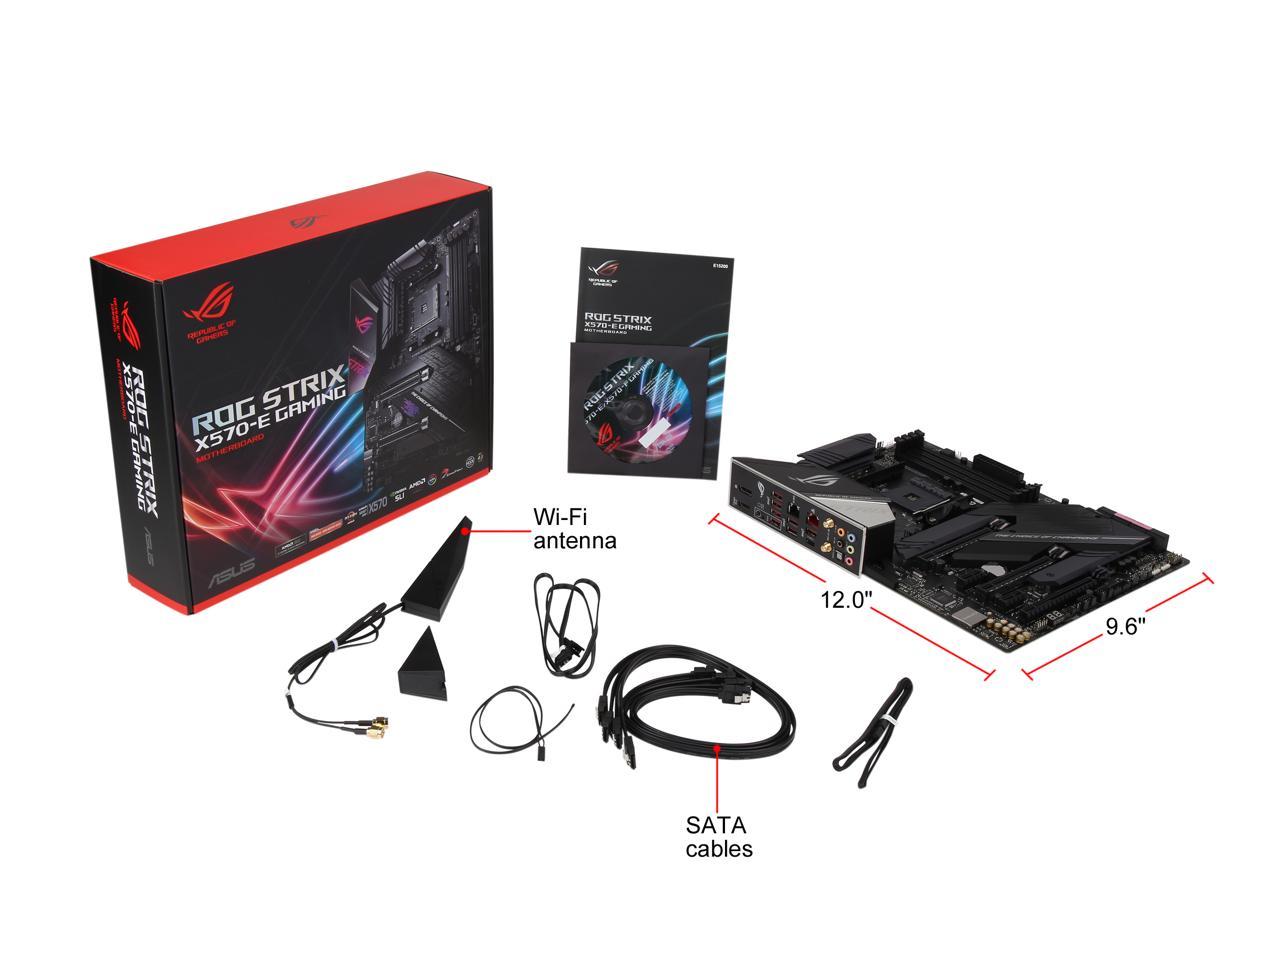 Asus Amd Am4 Rog Strix X570-E Gaming Atx Motherboard With Pcie 4.0, Wifi 6, 2.5Gbps Lan, Dual M.2, Sata 6Gb/S, Usb 3.2 Gen 2